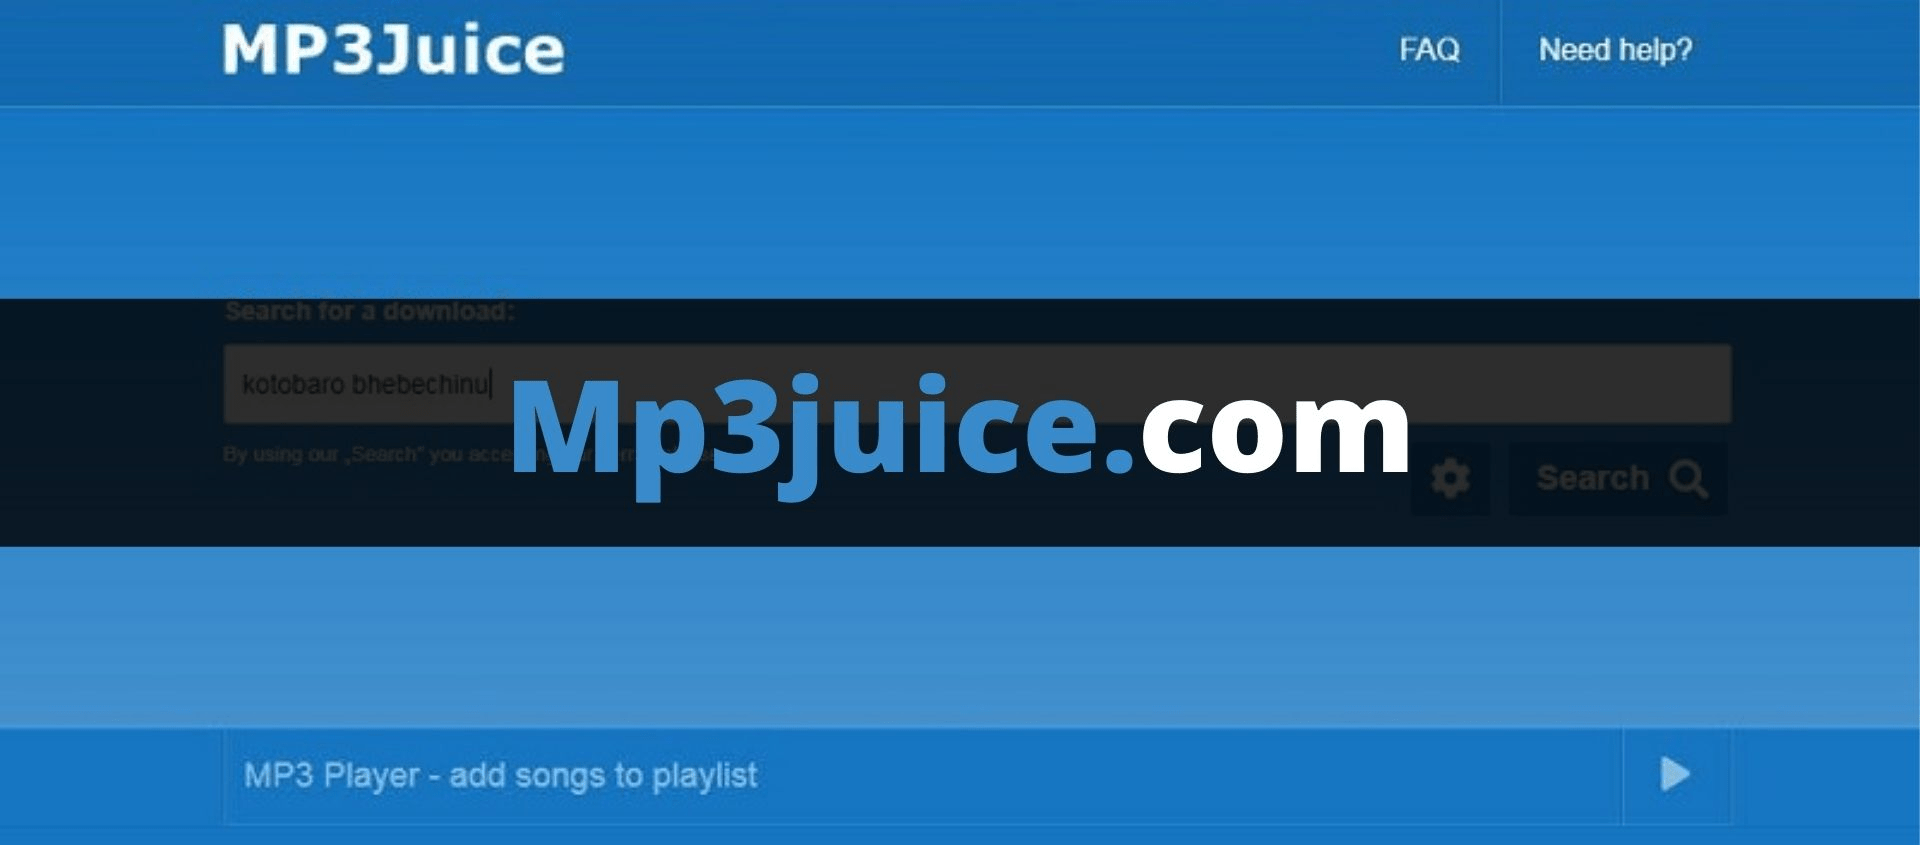 The Melodic World of MP3Juices com Ultimate Music Download Destination